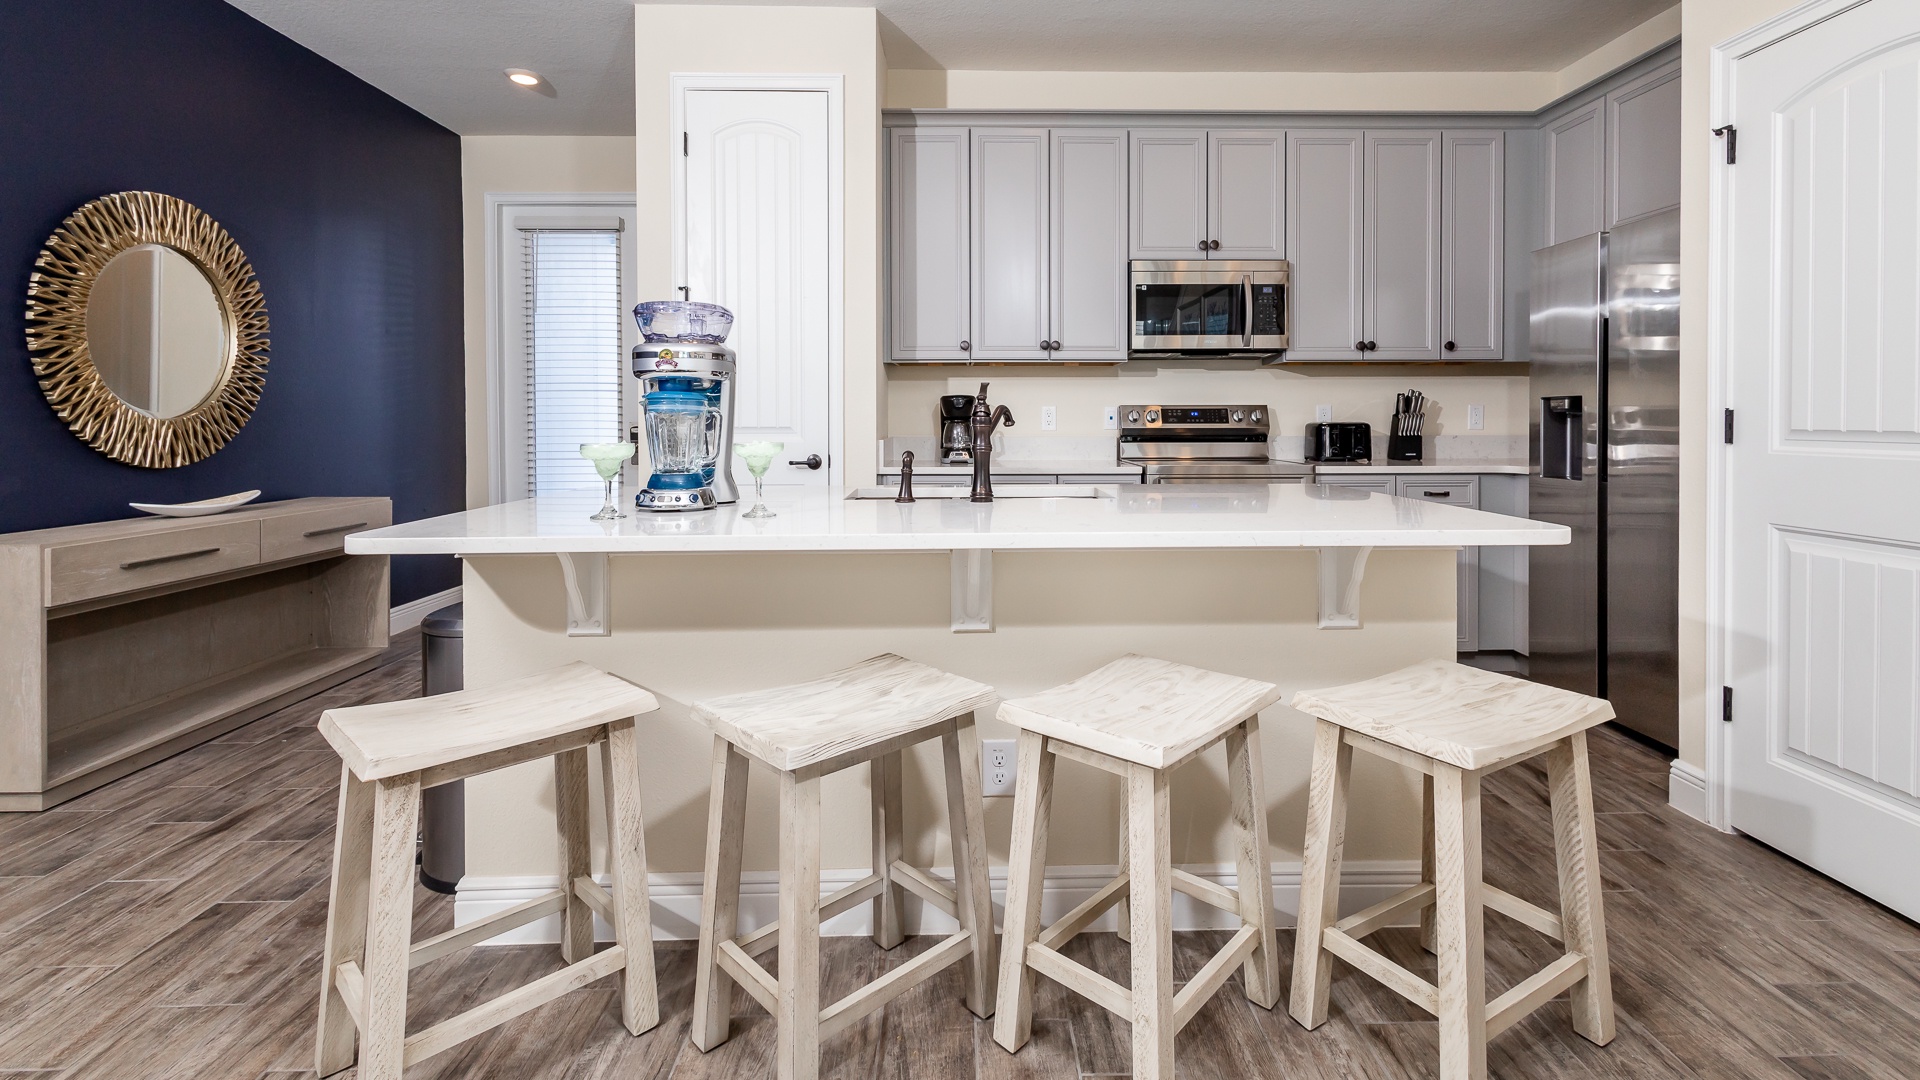 Whip up an adult beverage & enjoy at the kitchen counter, with seating for 4